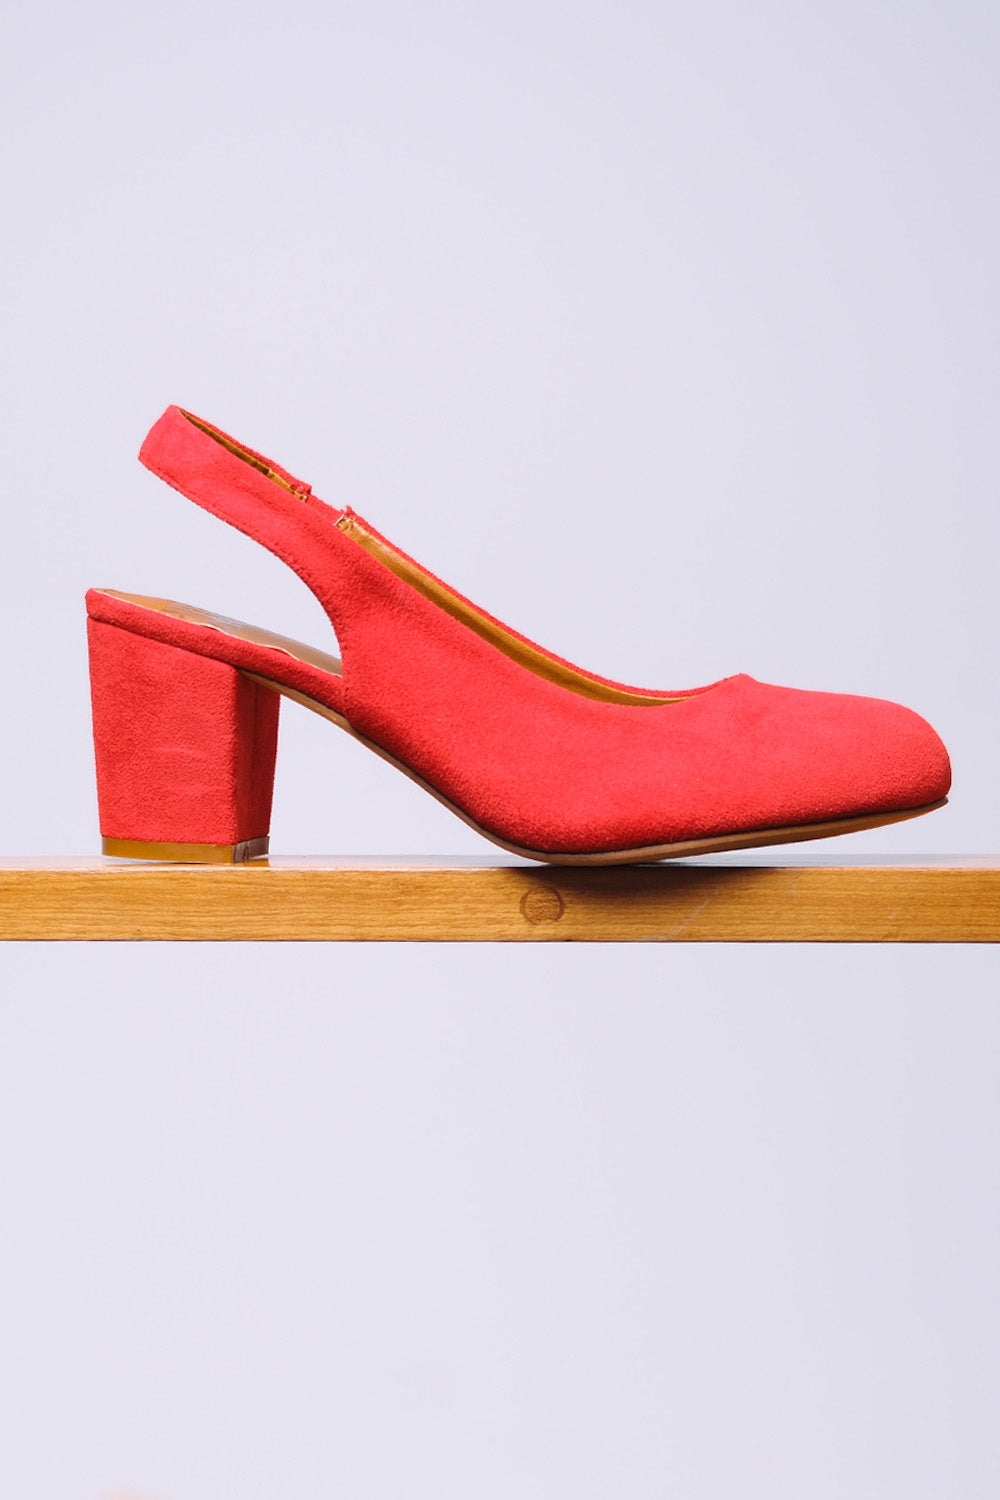 EDITH EXTRA WIDE FIT BLOCK HEEL SLINGBACK SHOES IN RED SUEDE